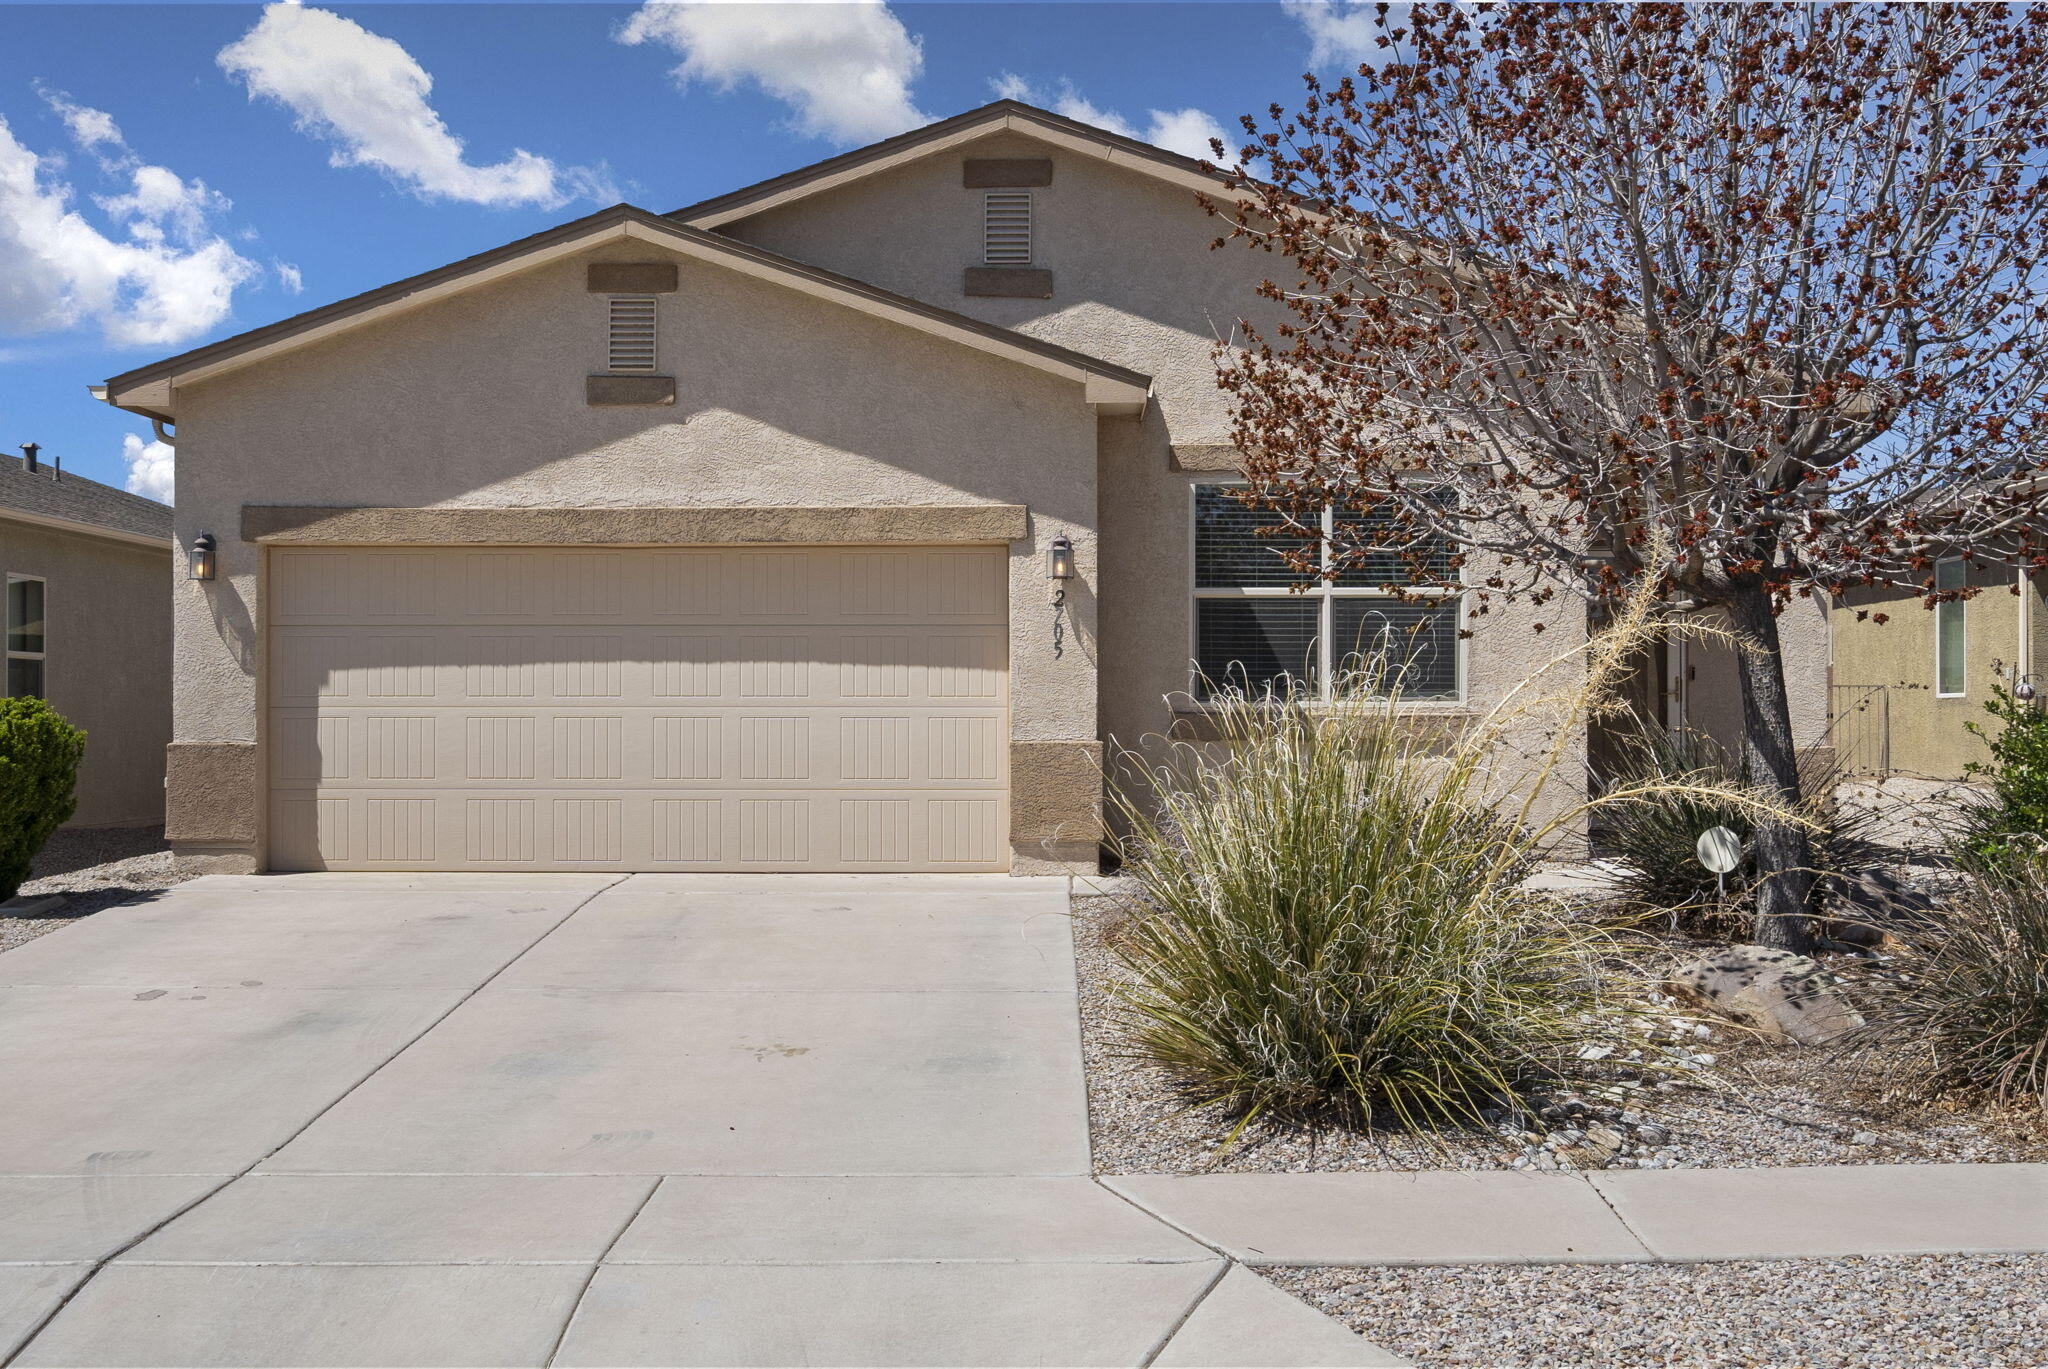 Exciting Opportunity in Rio Rancho's Cielo Norte Neighborhood! Discover this stunning DR Horton home, a single-story gem with an open floorplan and high ceilings that amplify the sense of space. The kitchen features upgraded cabinetry paired with sleek black appliances, and a breakfast nook. Additional upgrades include a newer tankless water heater ensuring efficiency and refrigerated air! Step outside into a  great sized backyard featuring zero scape landscaping, designed for easy maintenance. This home is ready for a new owner! Schedule your showing today!